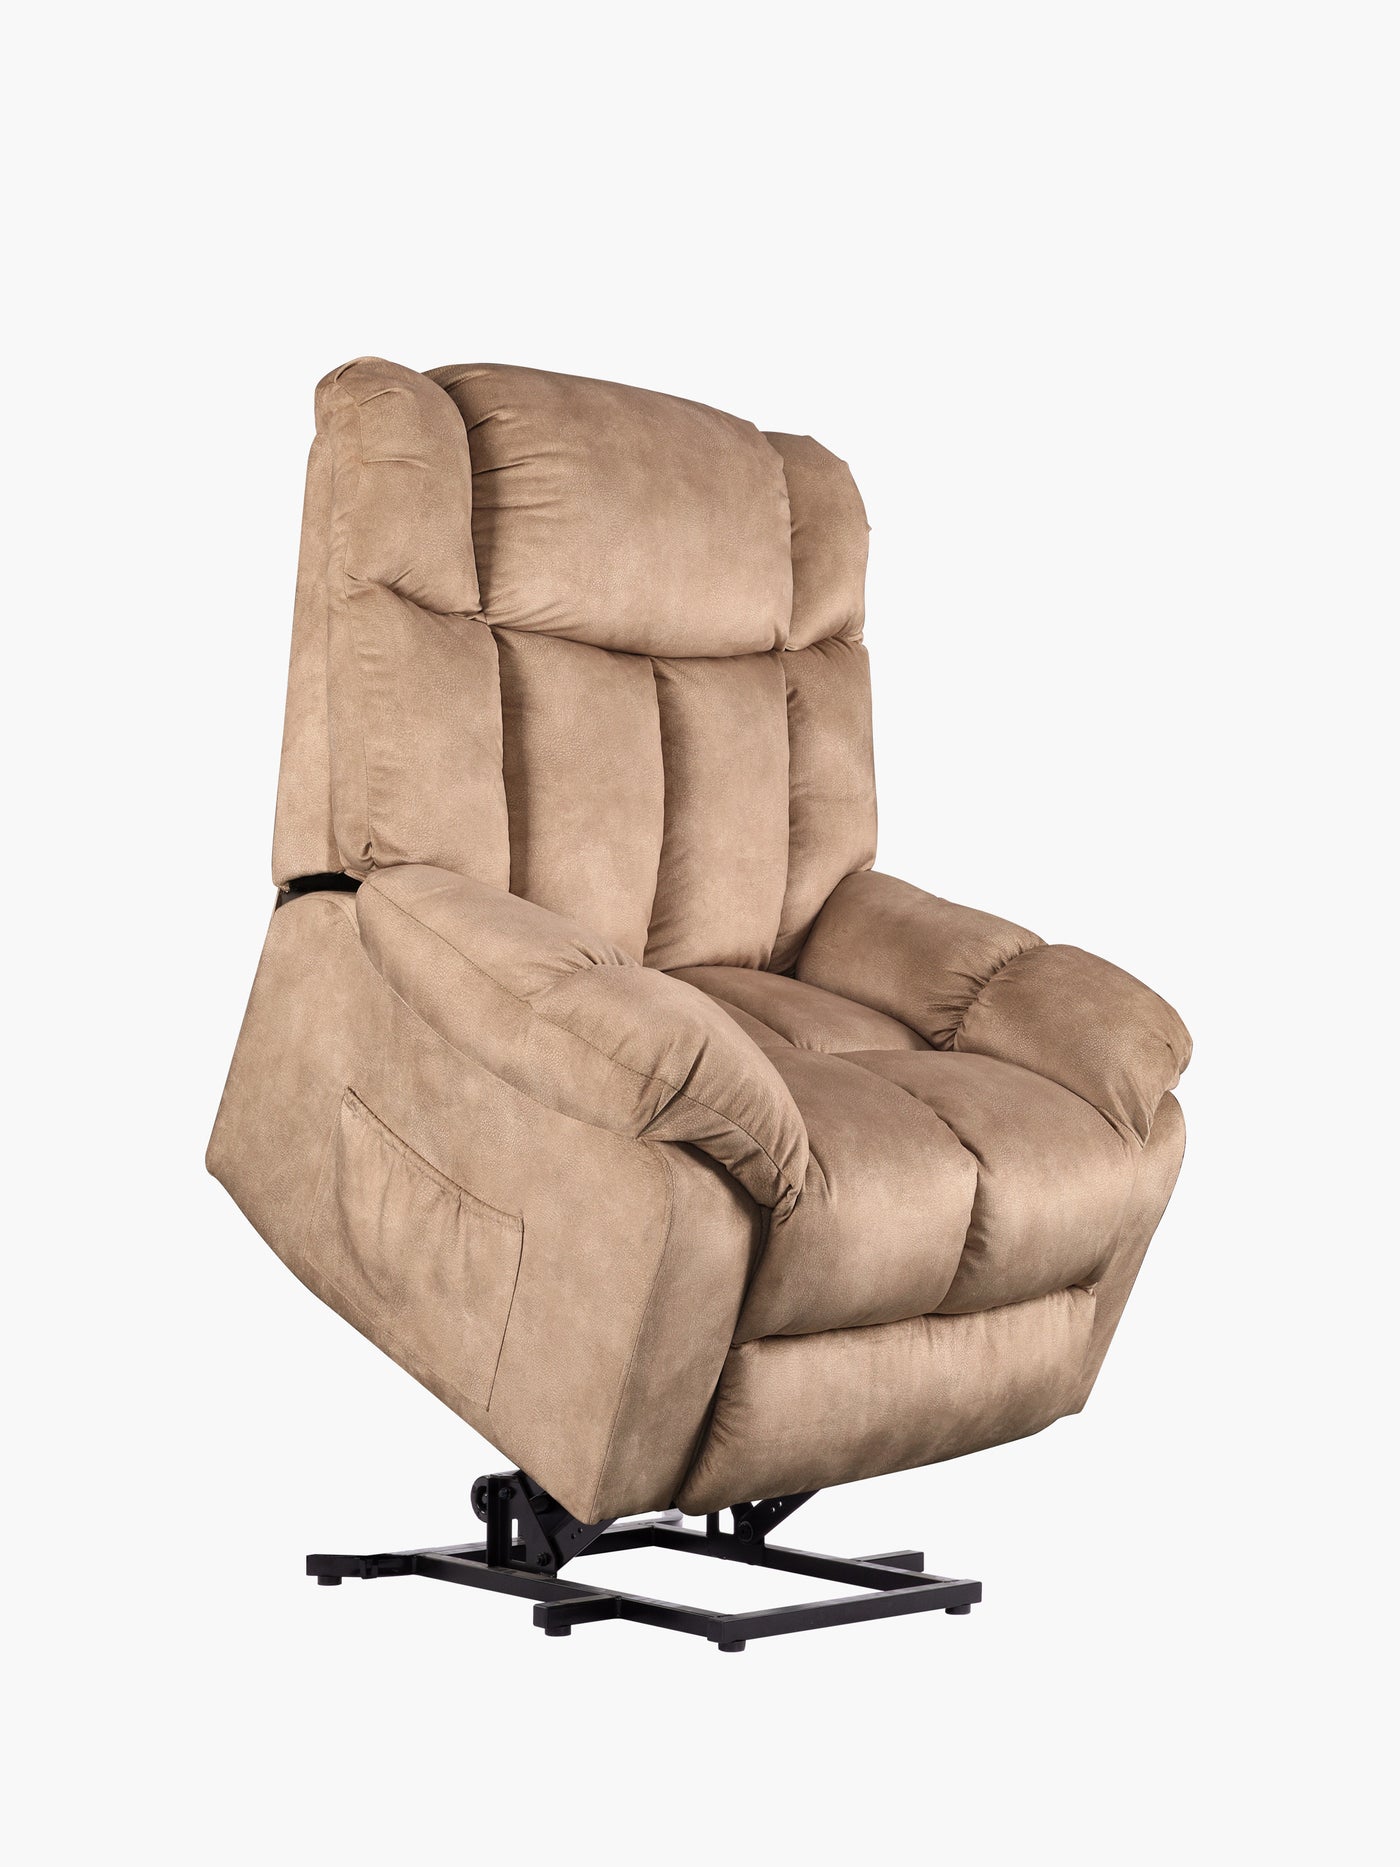 COLAMY Fabric Power Lift Recliner Chair for Elderly CL8233 Camel #color_camel